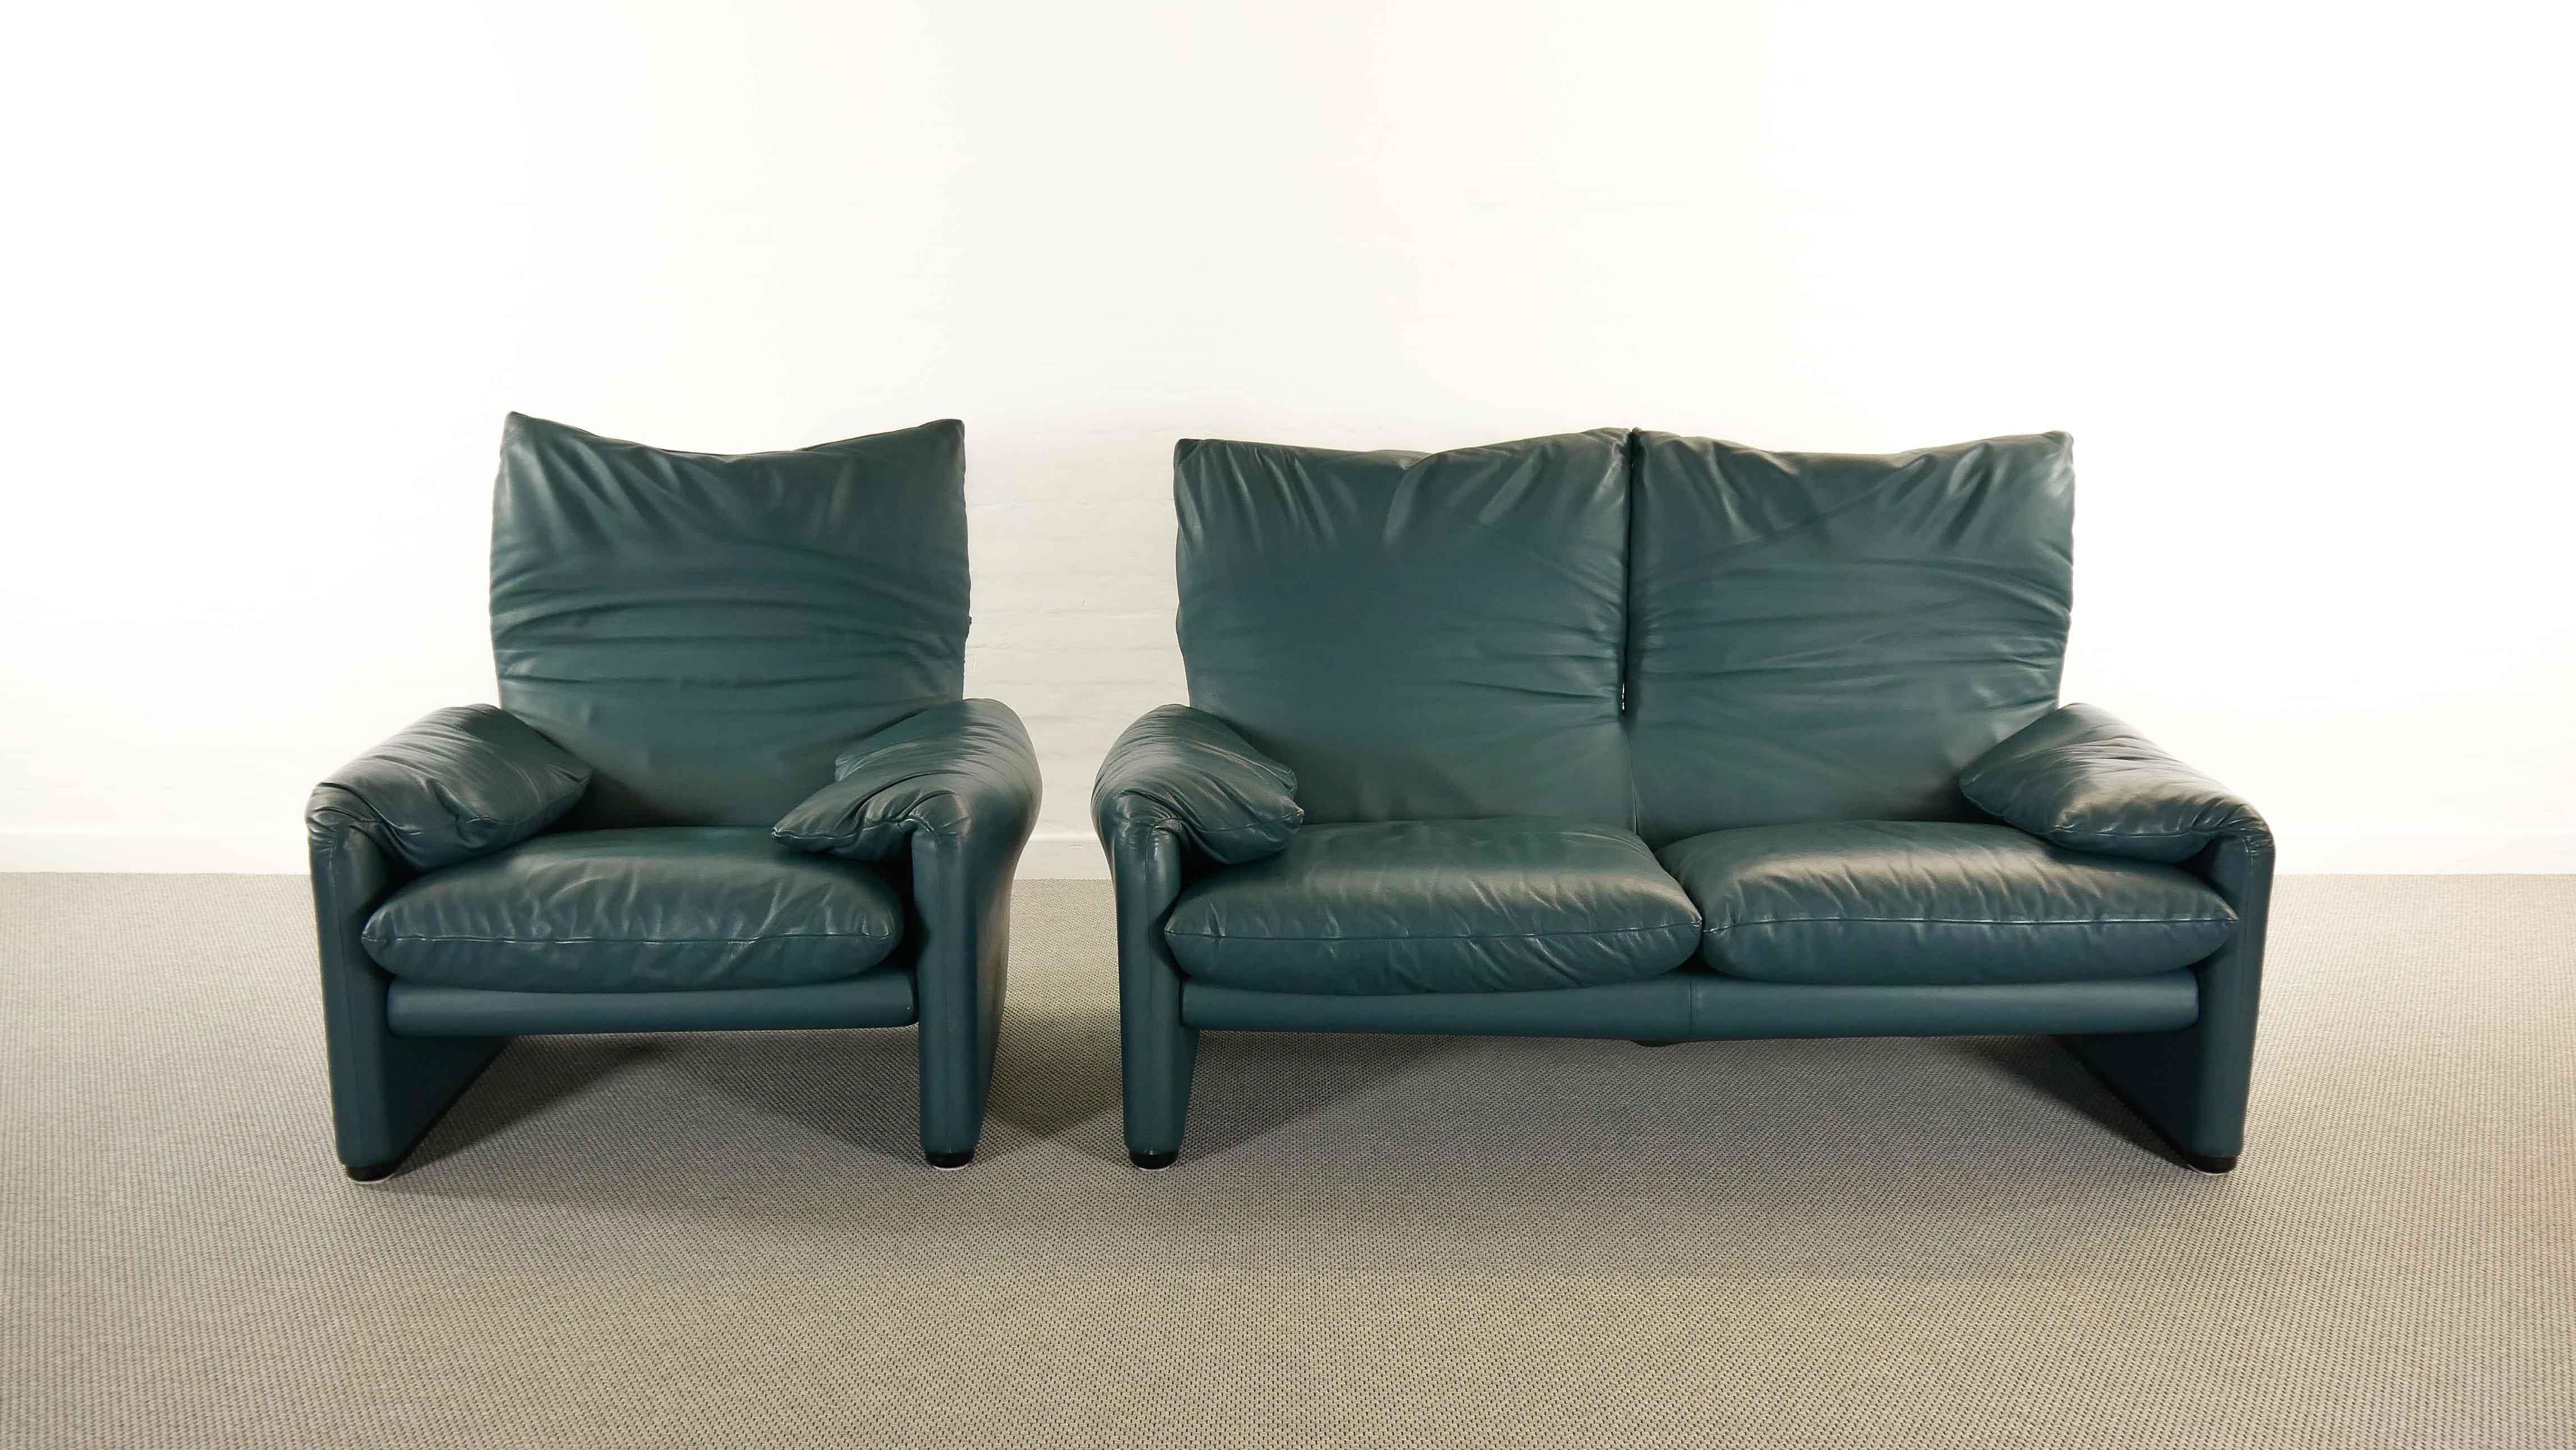 Set Cassina Maralunga 2-Seat Sofa and Easy Chair by Vico Magistretti in Leather 1